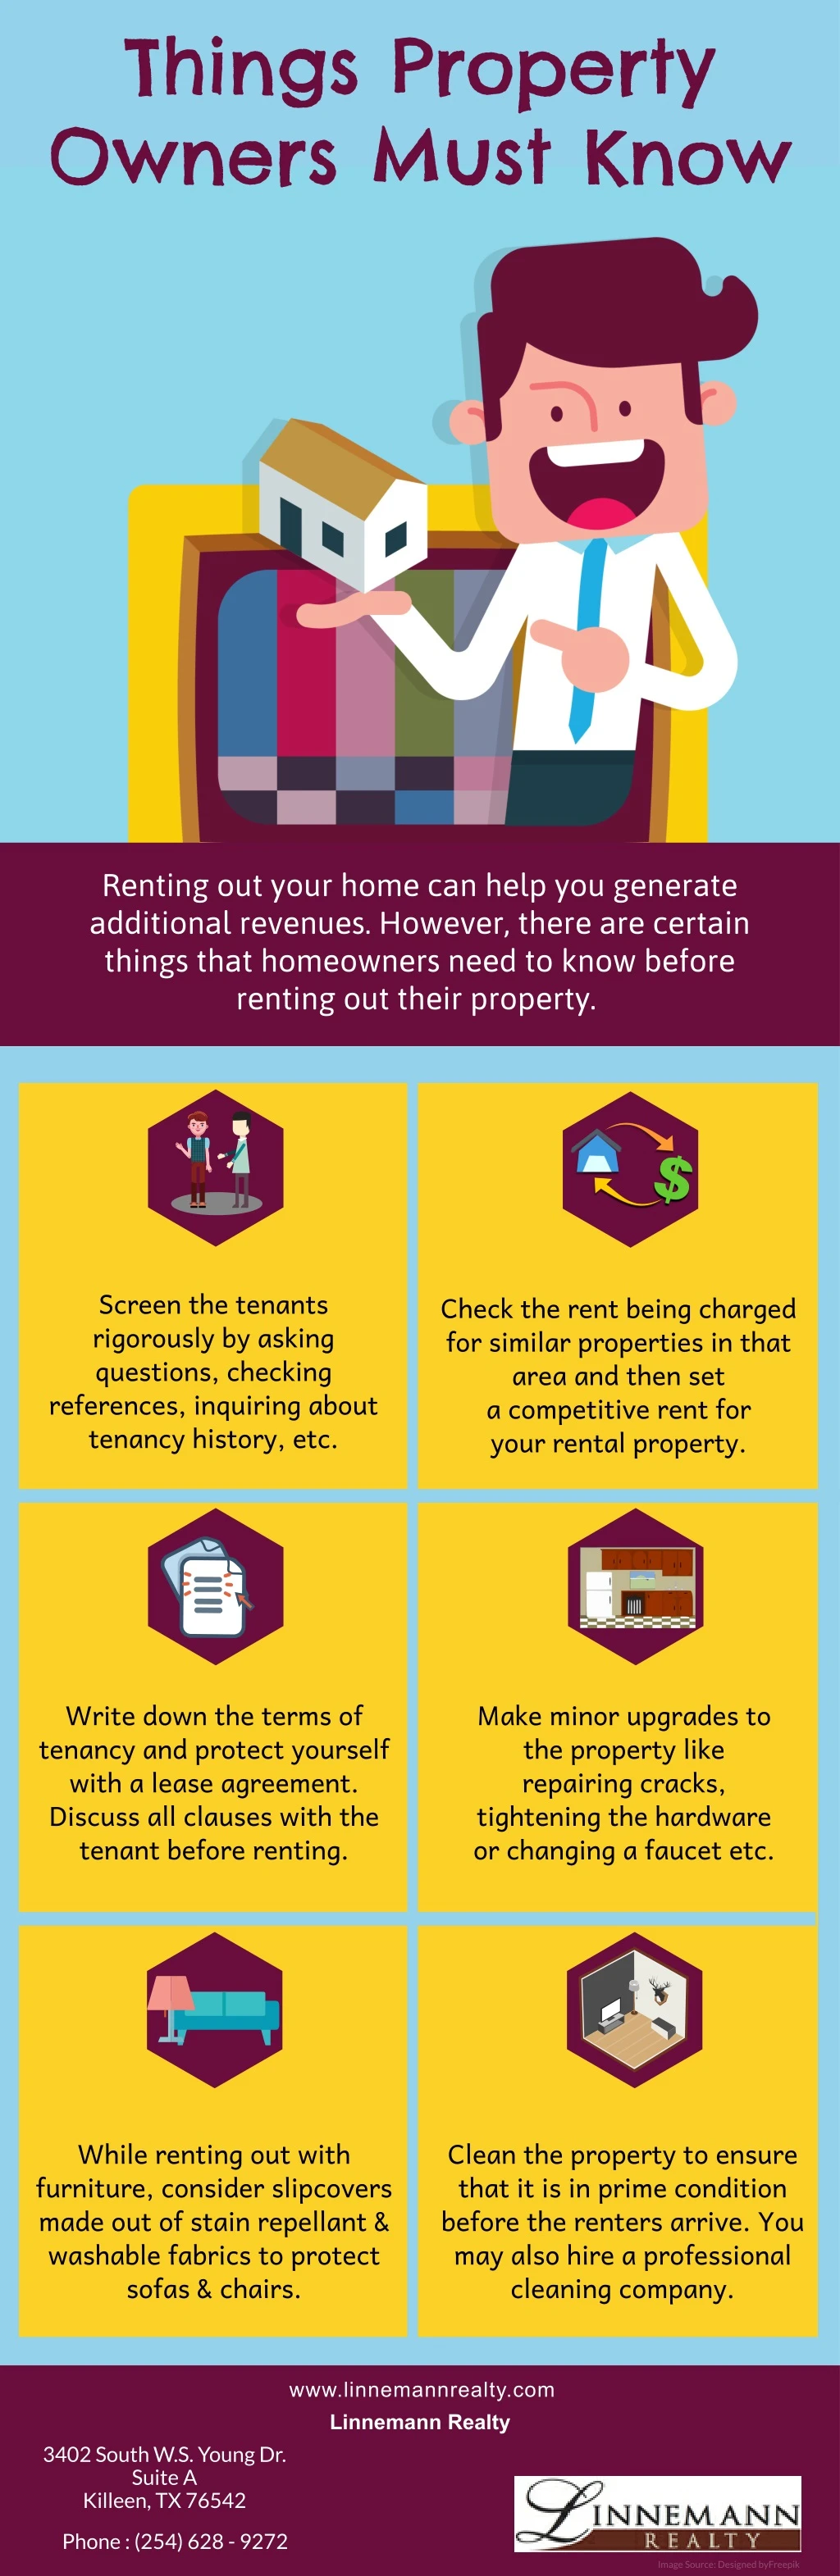 things property owners must know